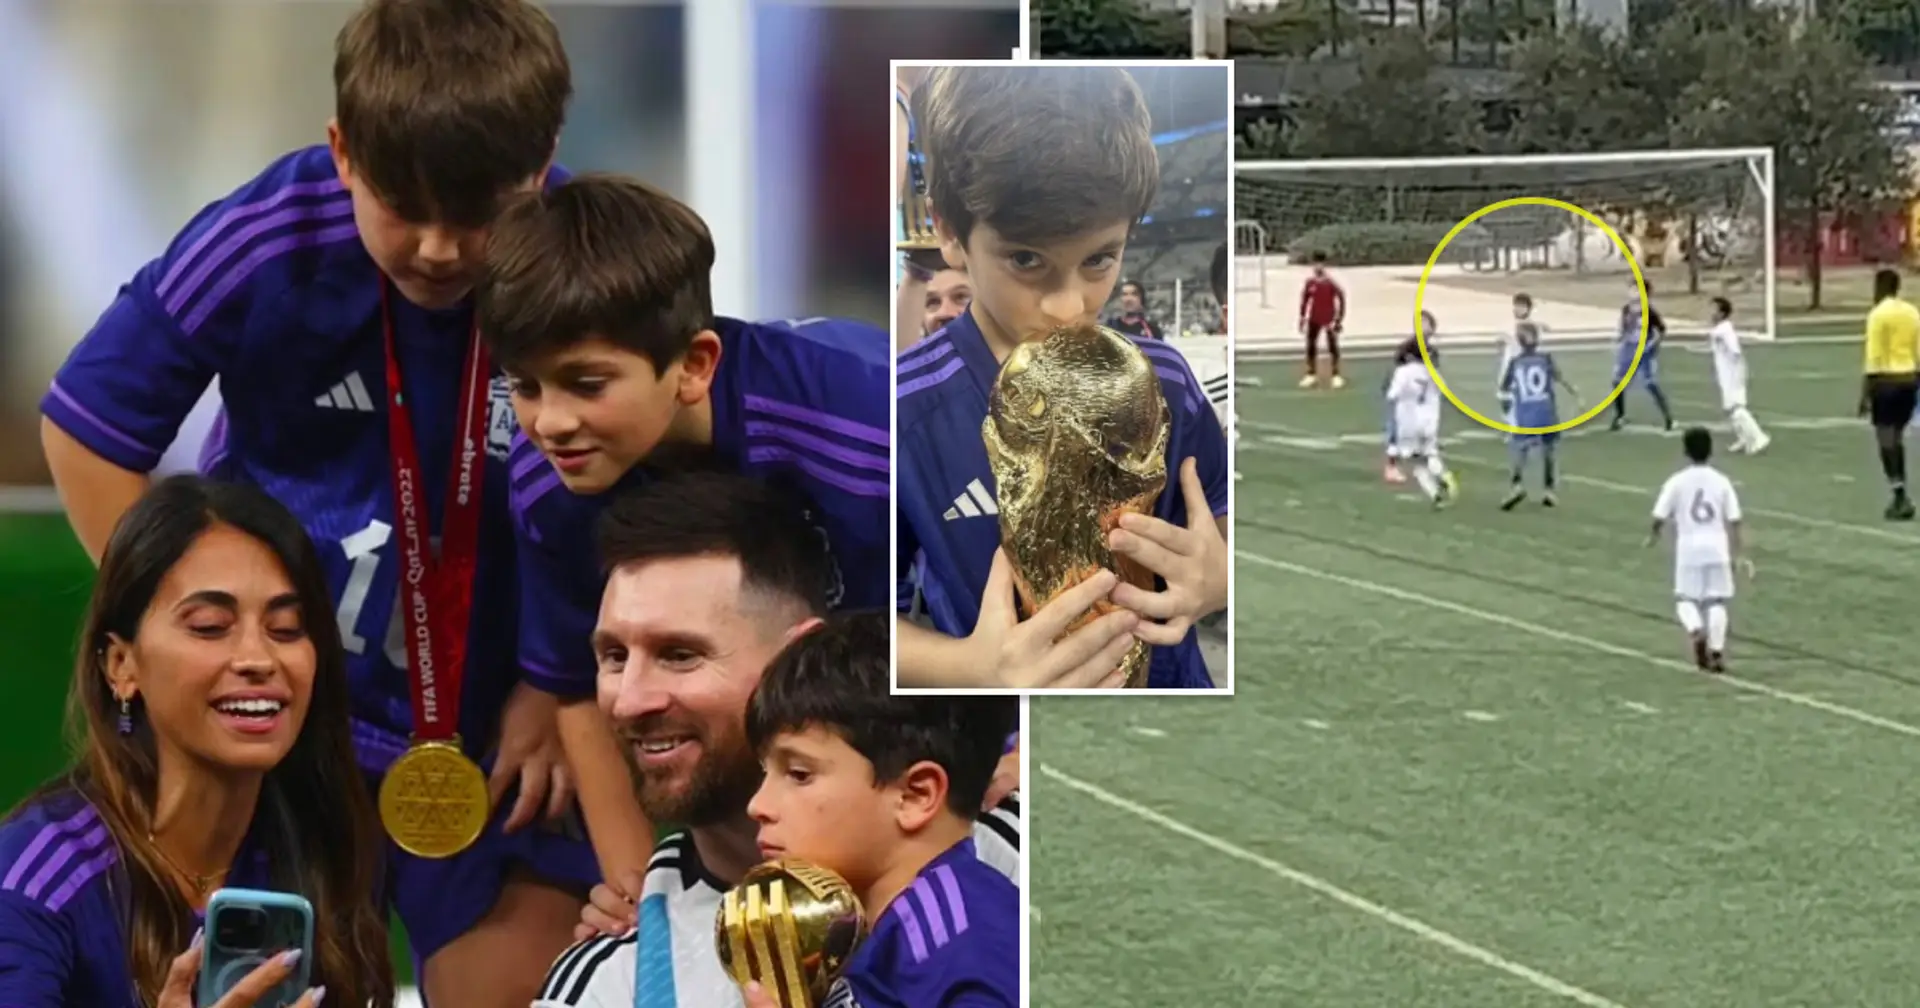 Like father, like son: Thiago Messi's jersey number at Inter Miami U-12 spotted